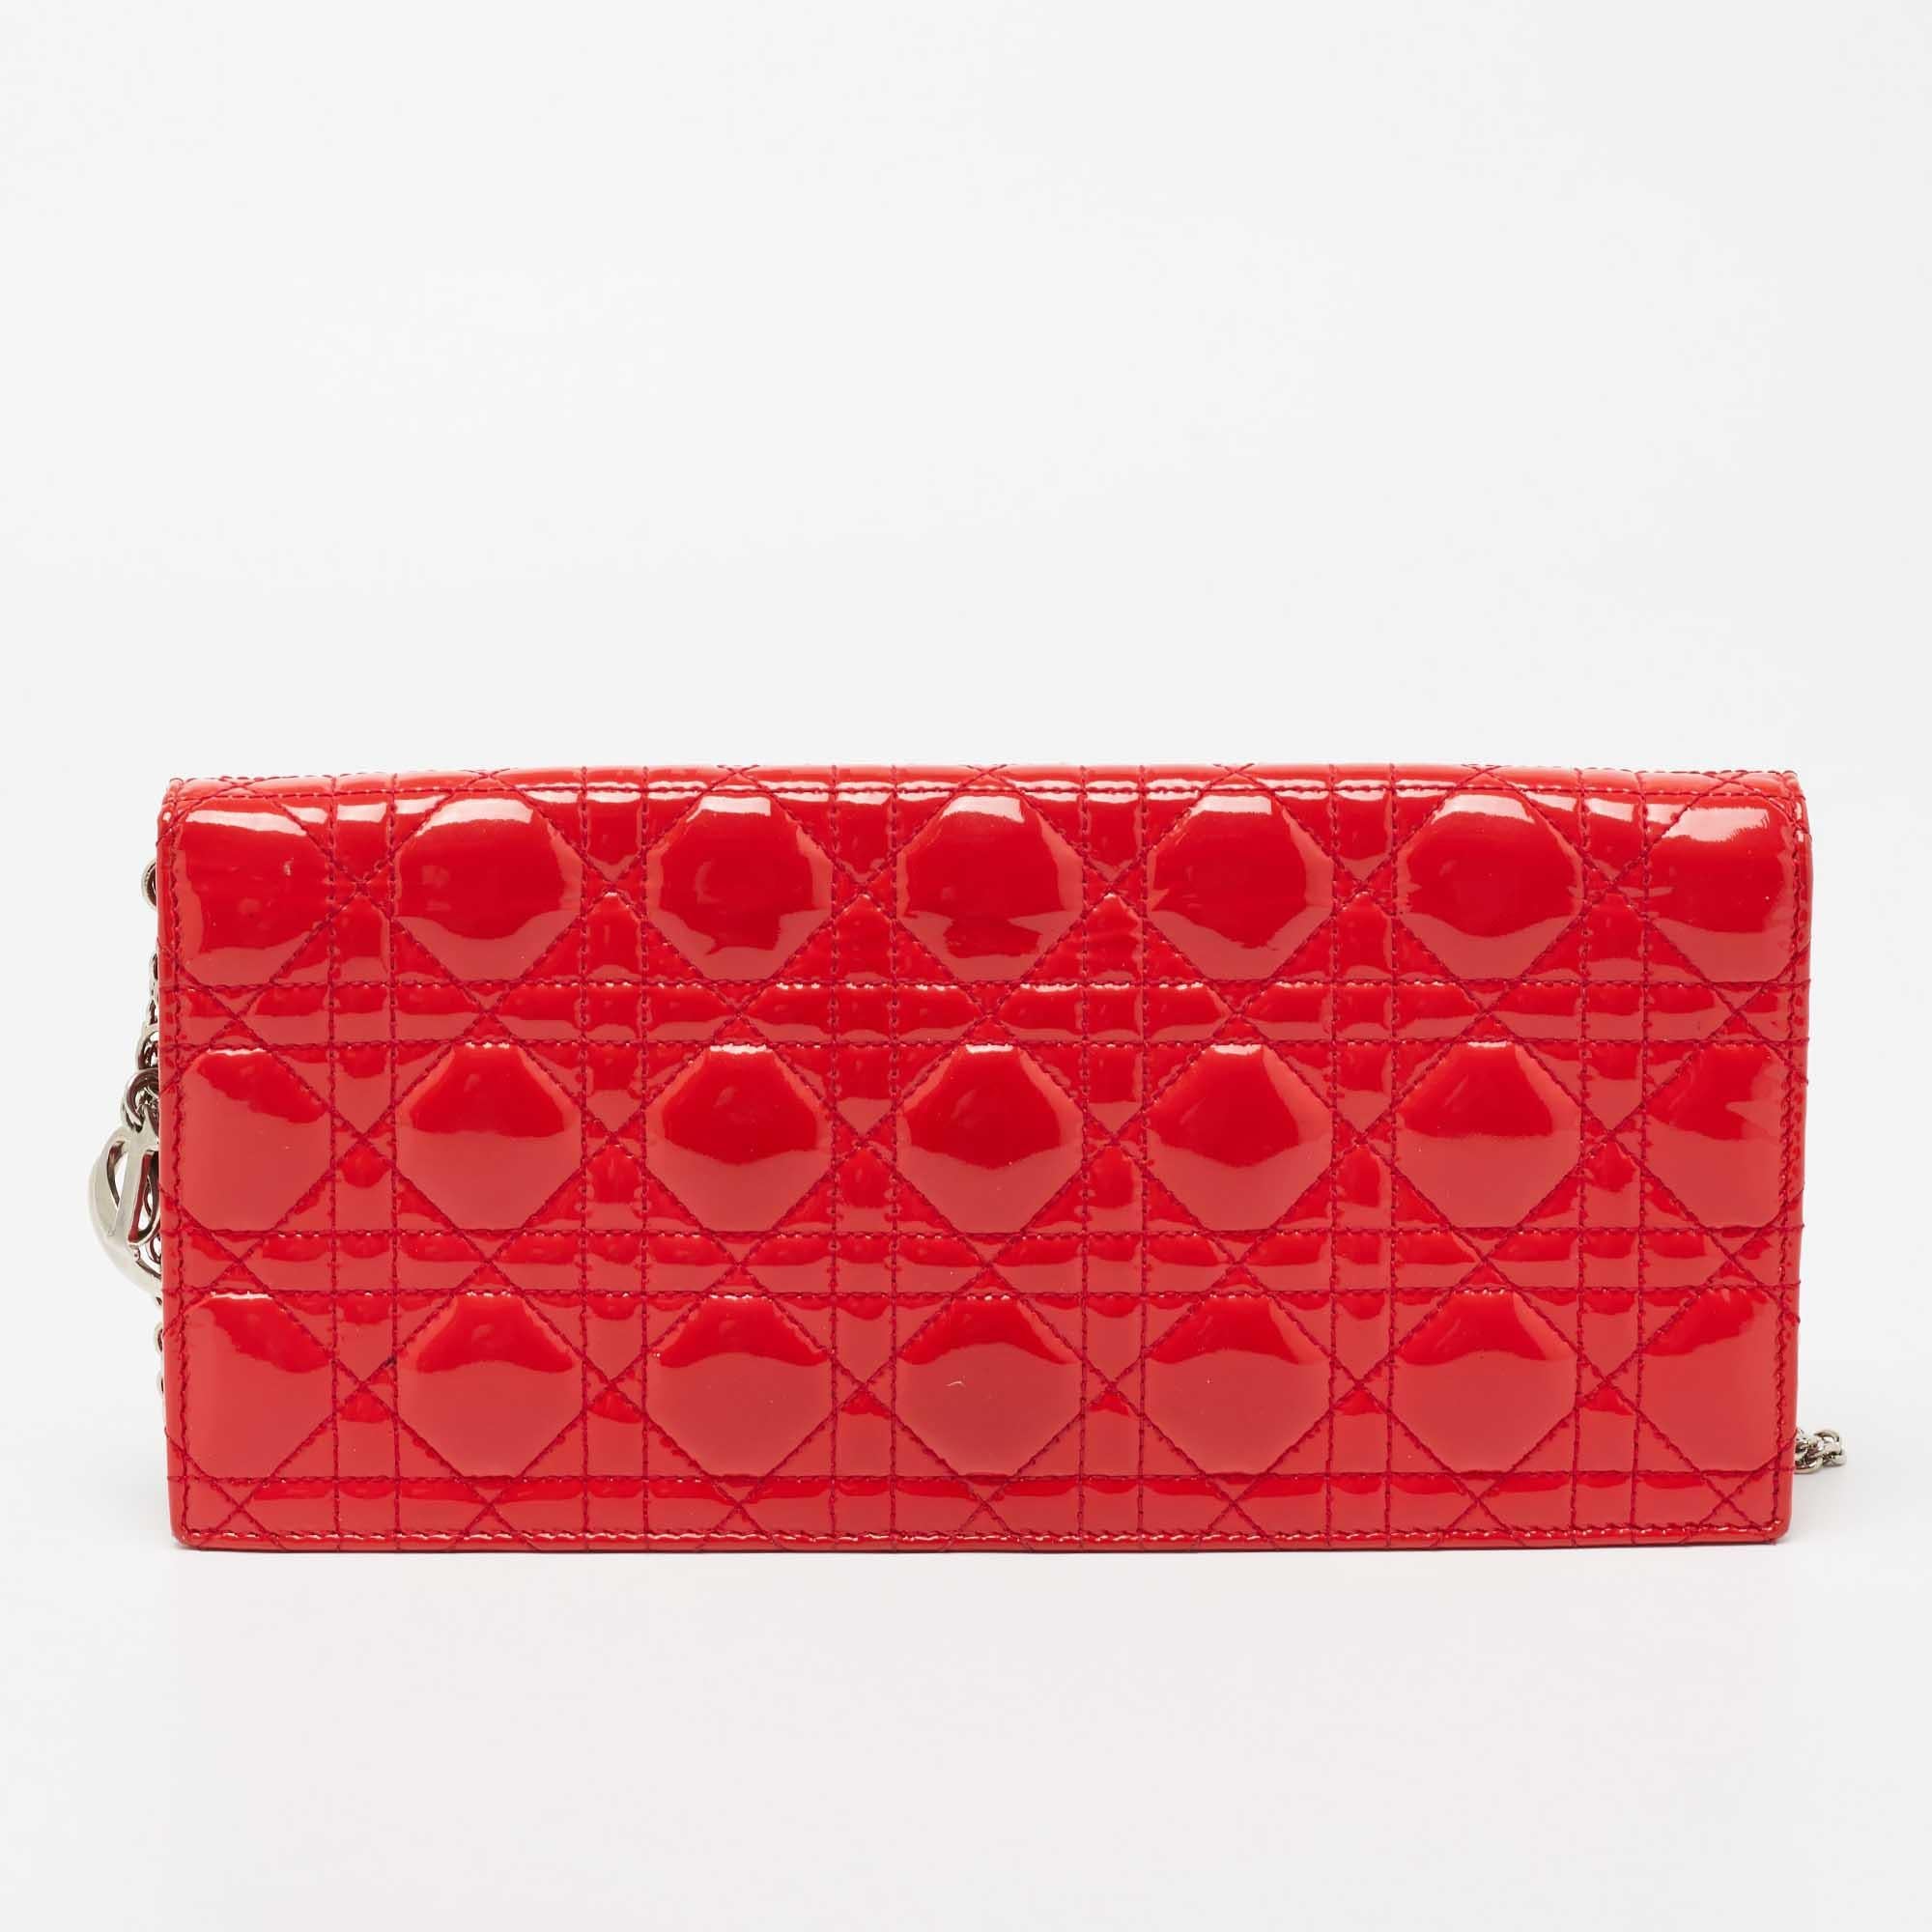 This exquisite Lady Dior clutch from Dior is a chic accessory that represents the brand's rich aesthetics and elegant designs. Crafted from quilted Cannage patent leather, the coral red clutch has a flap style with logo letter charms on the side.